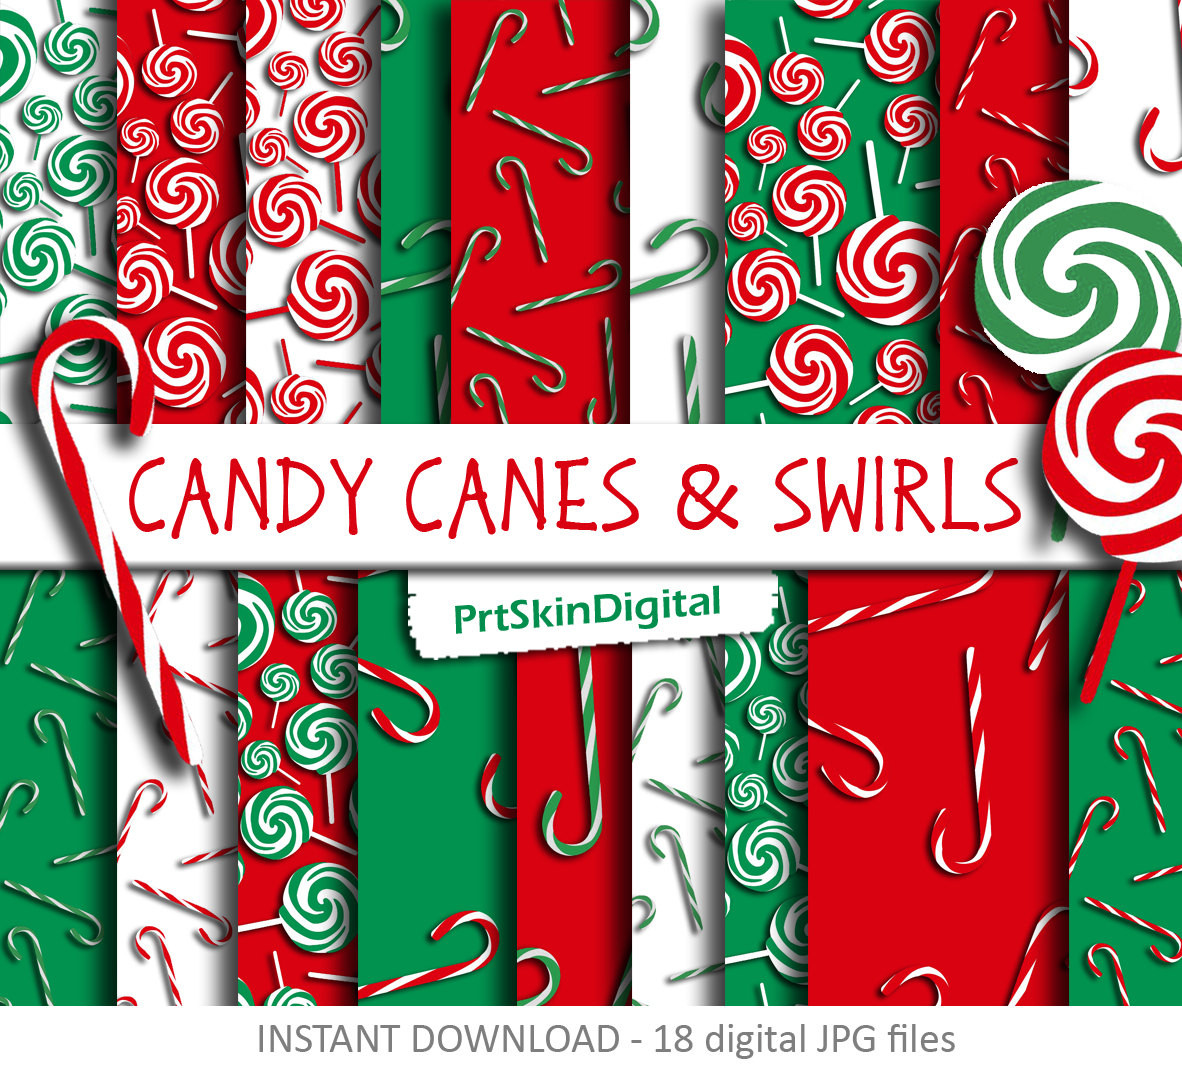 Candy Cane Christmas Shop
 Christmas Digital Paper Candy Canes & Swirls with